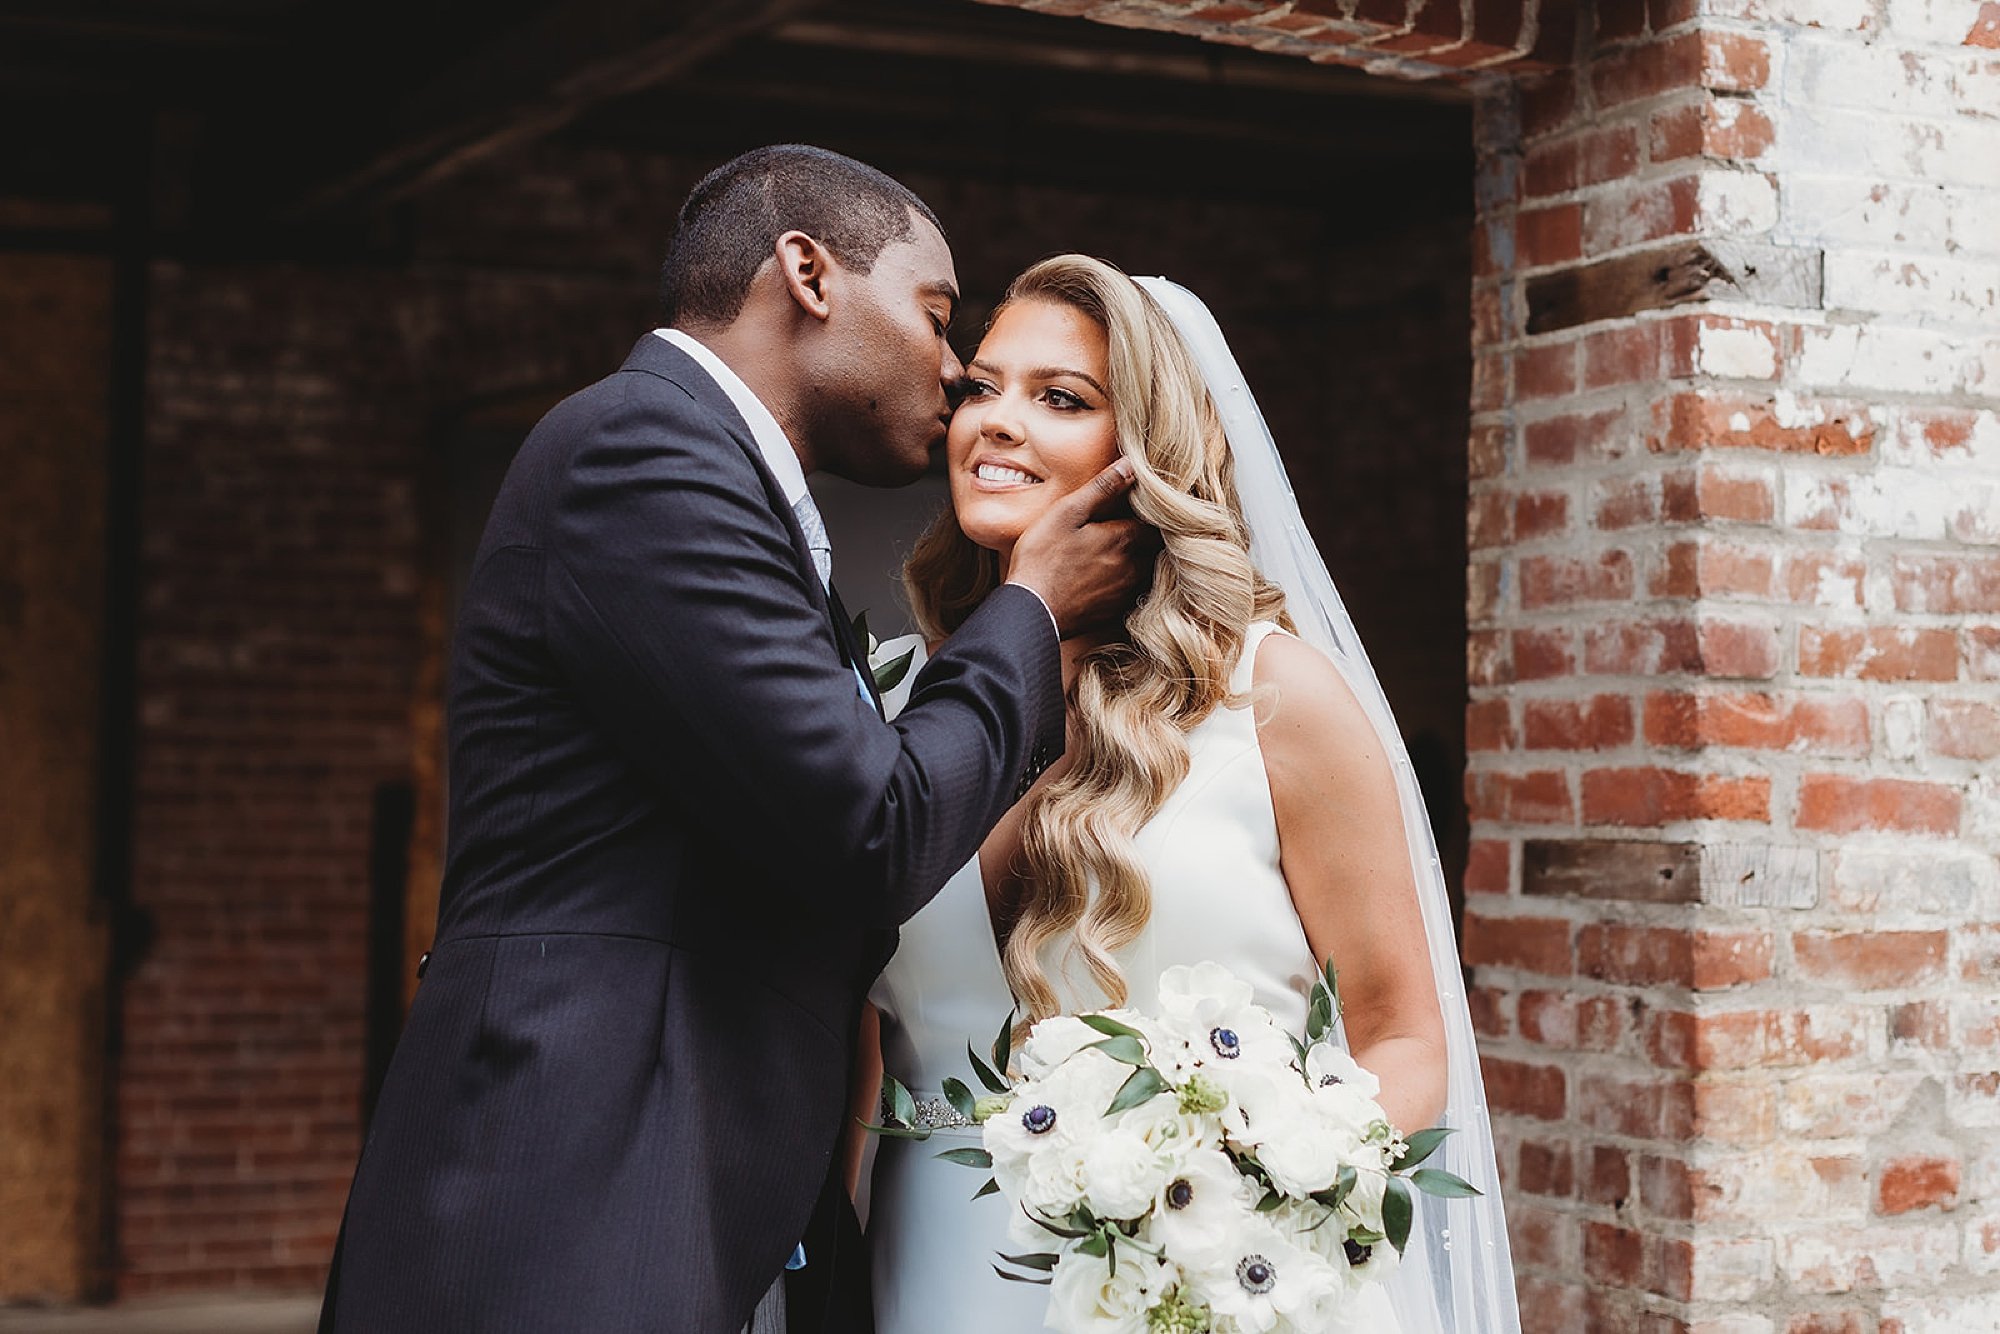 groom leans to kiss bride's cheek in front of brick building at The Roadhouse